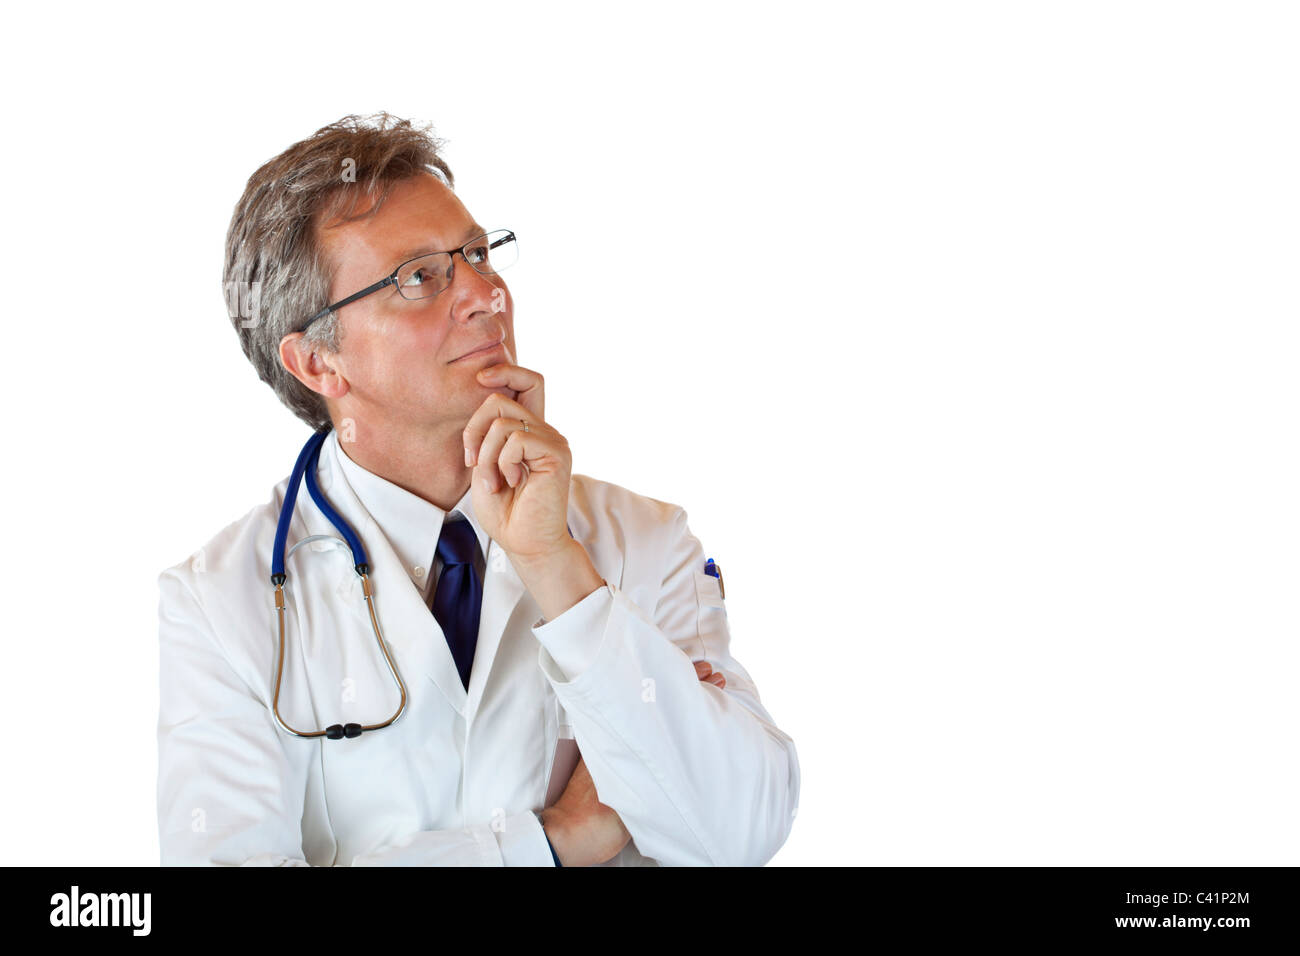 Aged medical doctor with hand on chin looks contemplative up. Isolated on white background. Stock Photo